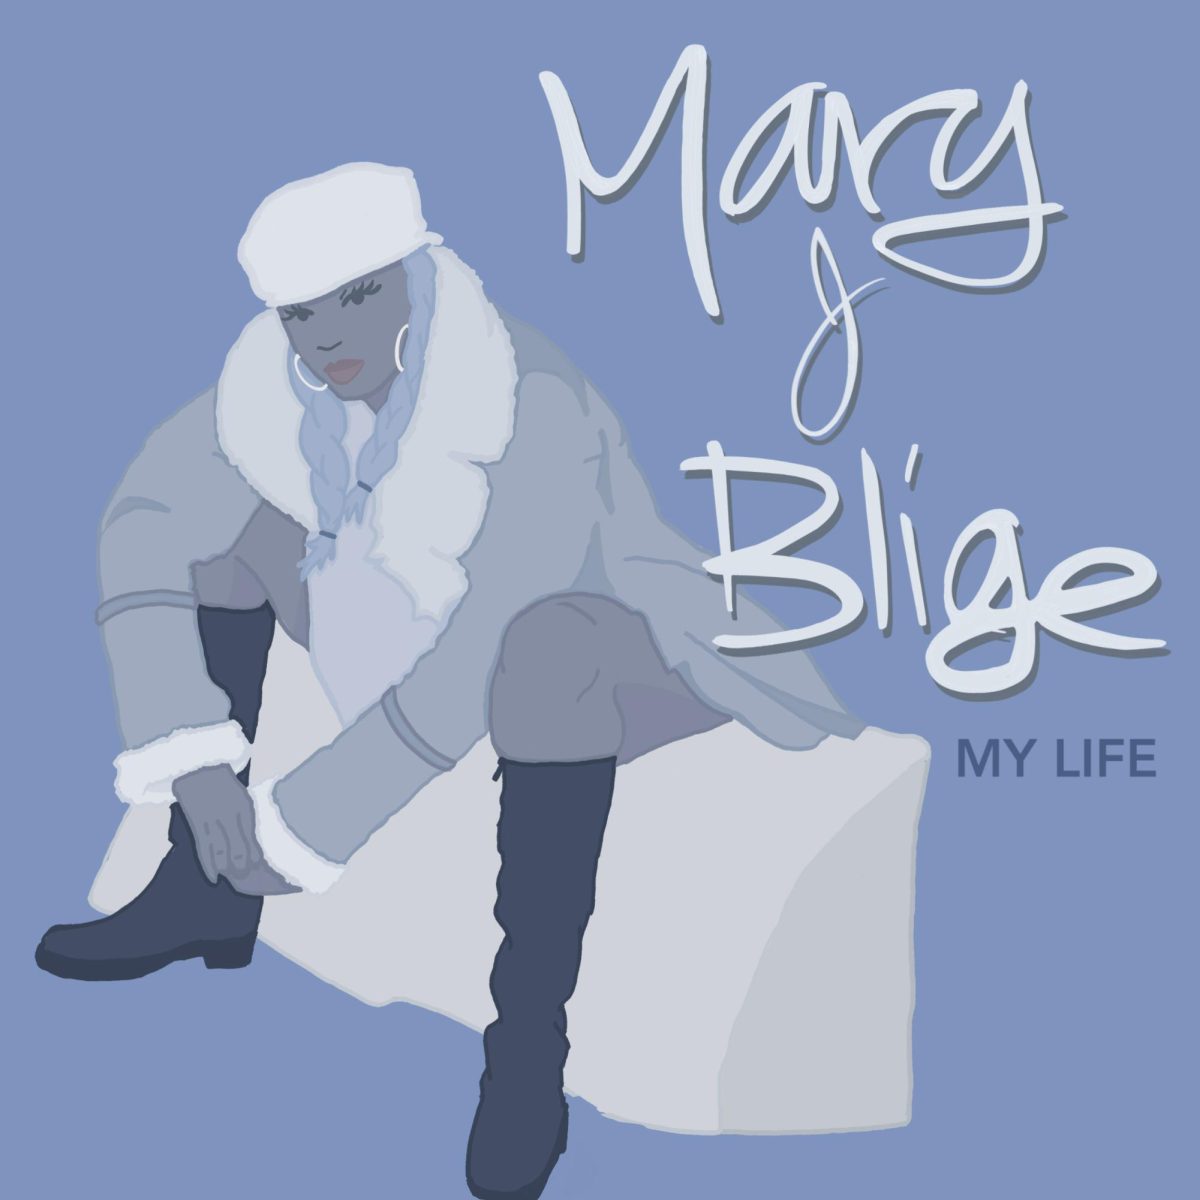 Album of the week: ‘My Life’ by Mary J. Blige